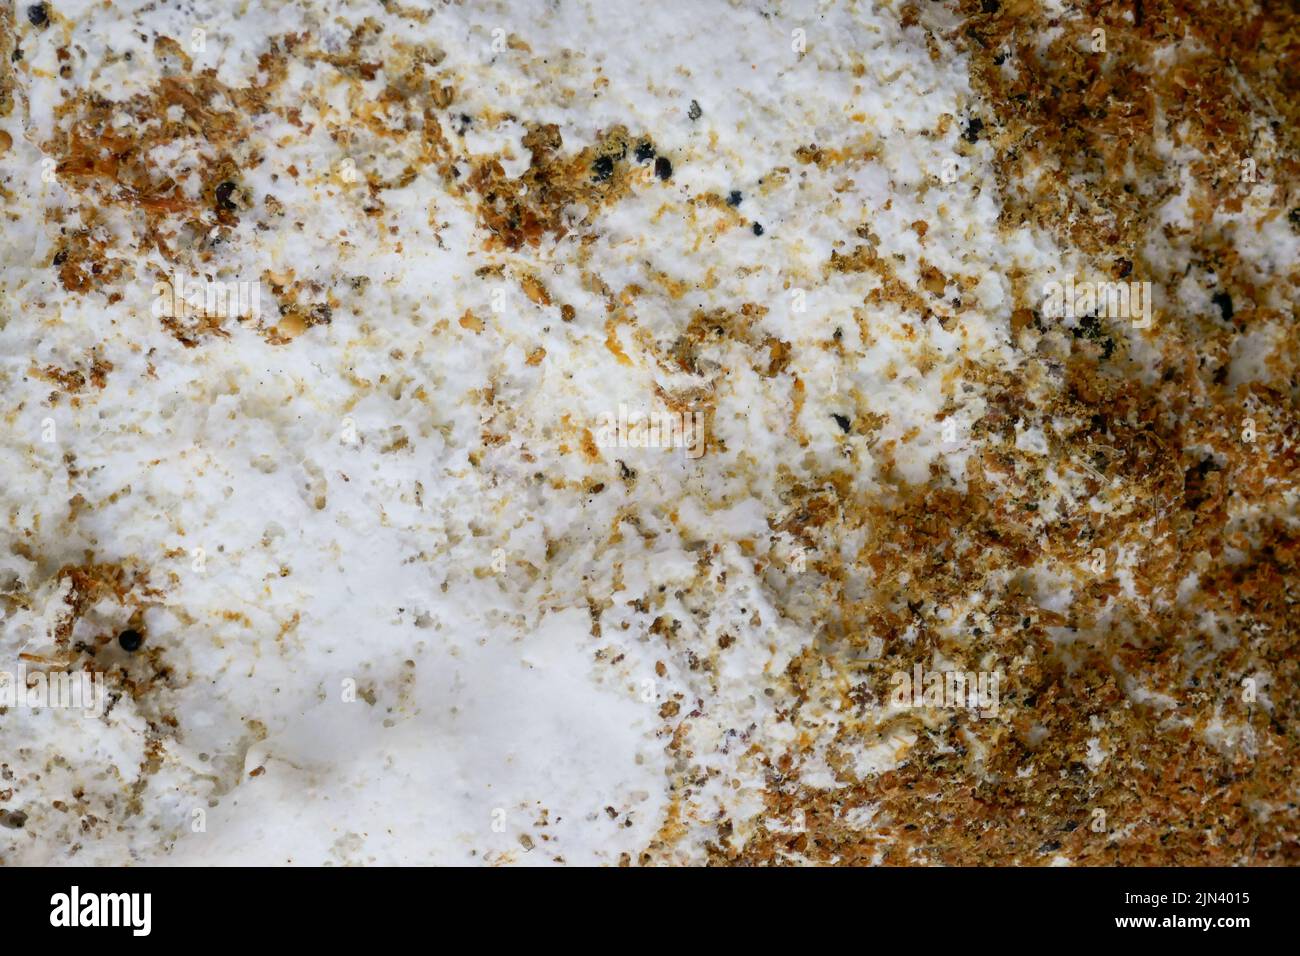 Mold texture. Gray and brown mold close-up. fungal diseases.Mold fungus wall surface. Mold and fungus problem Stock Photo